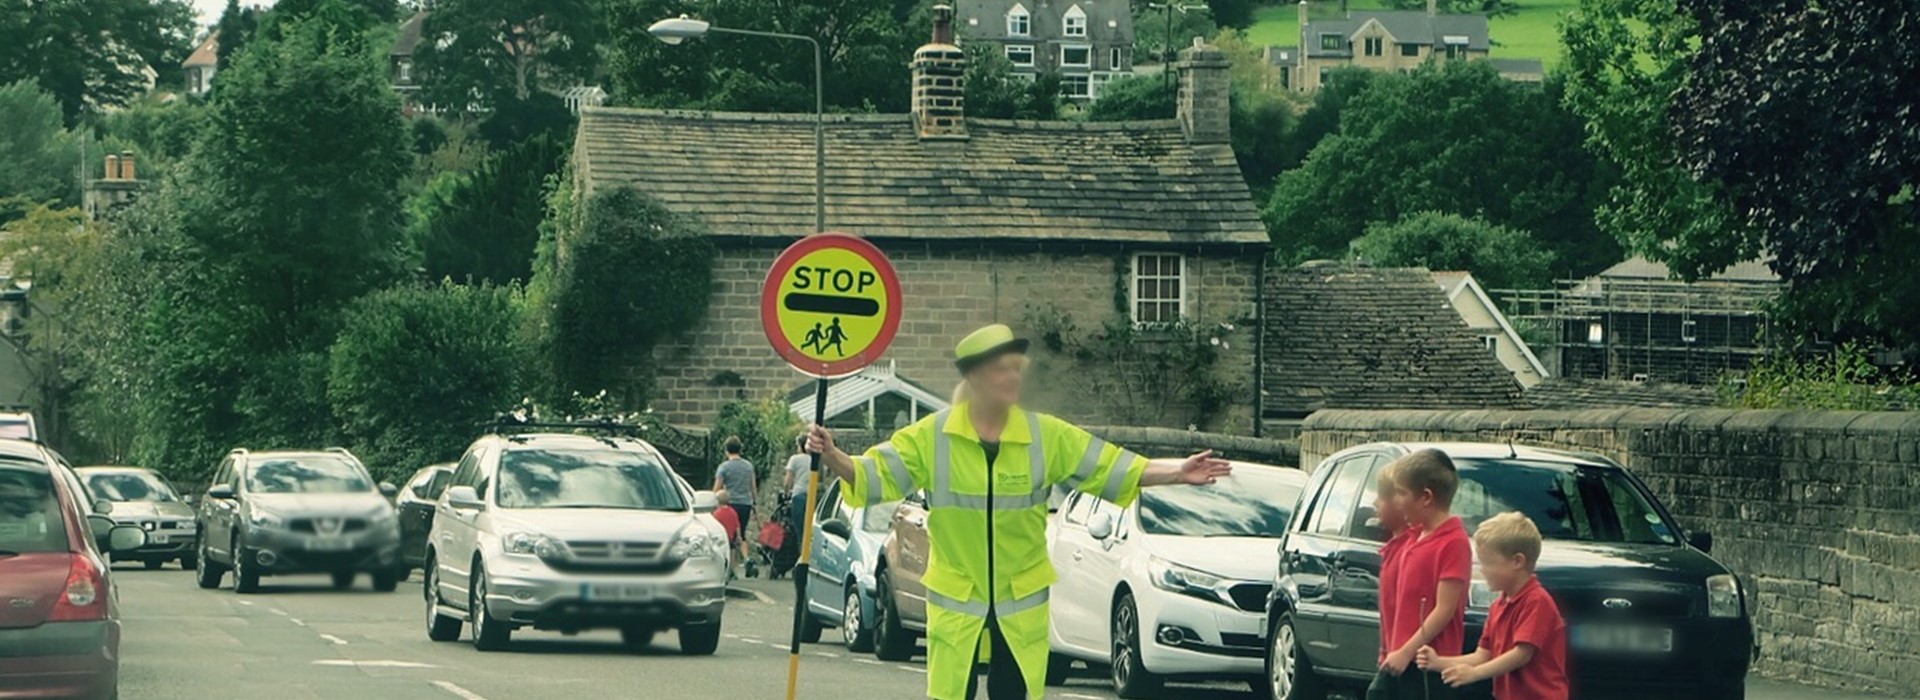 Lollipop officer in the road helping children to cross the road